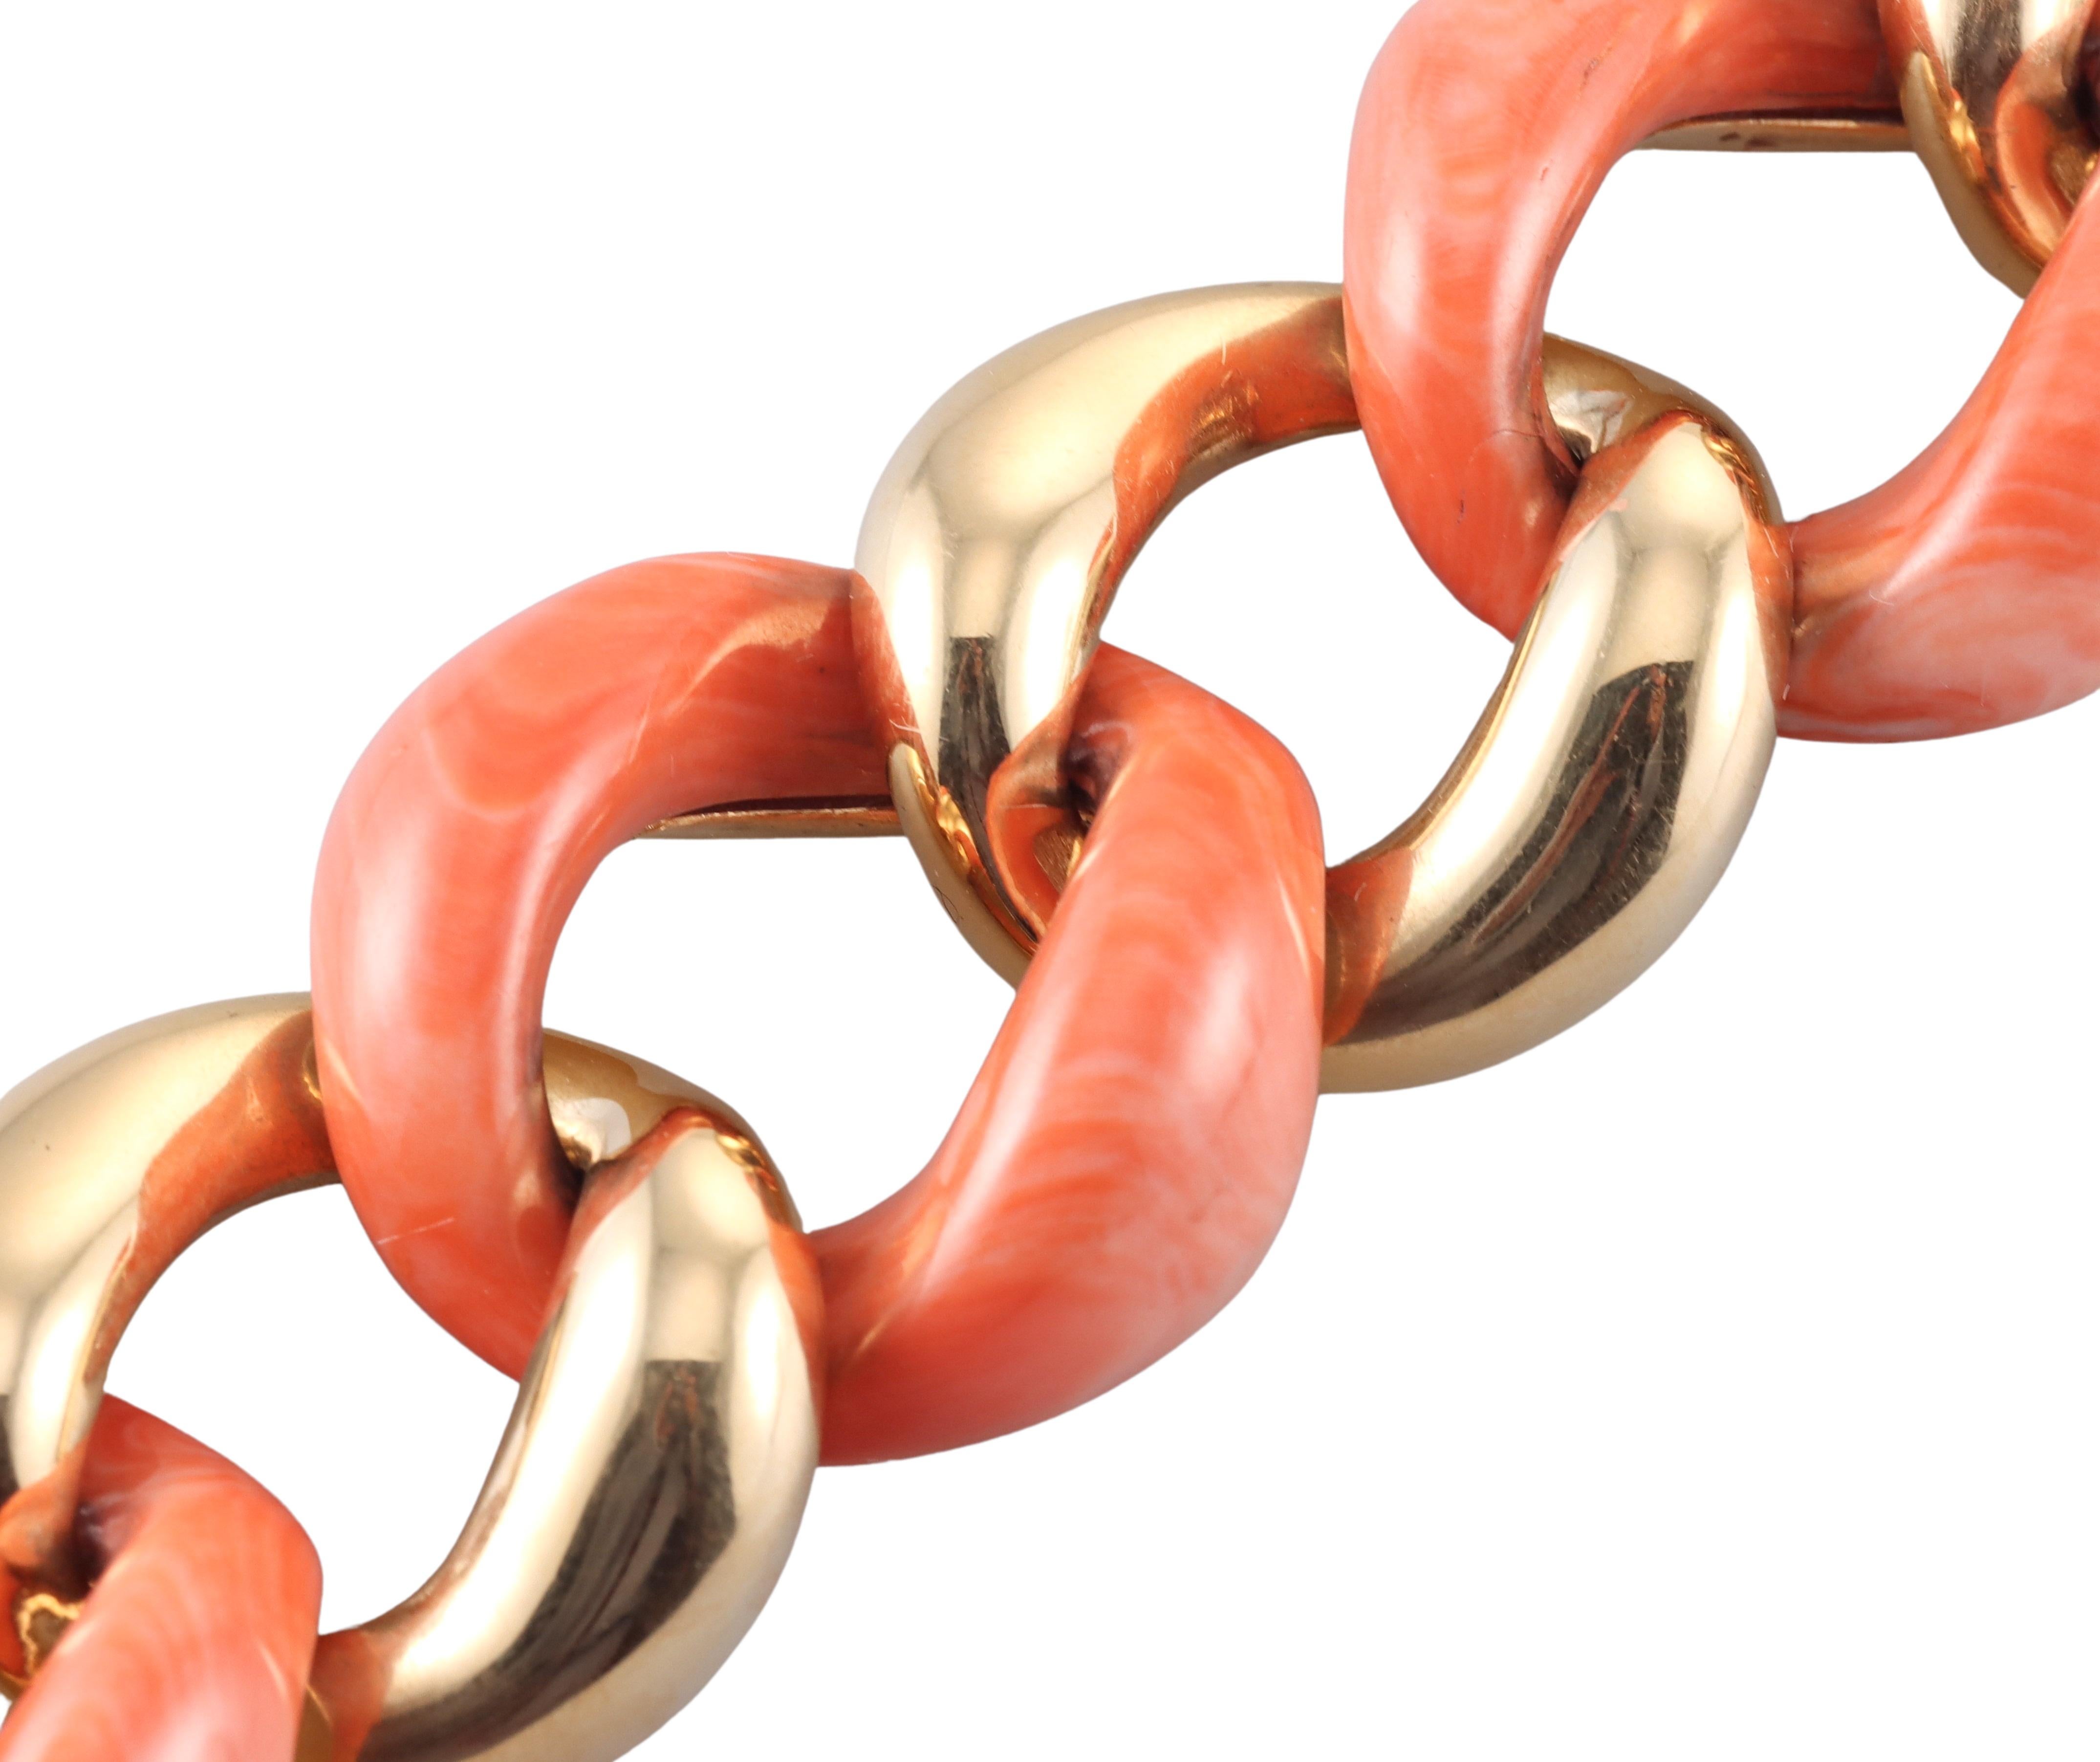 Classic Link bracelet by Seaman Schepps, set in 18k yellow gold, with alternating coral links. Bracelet is 8.25